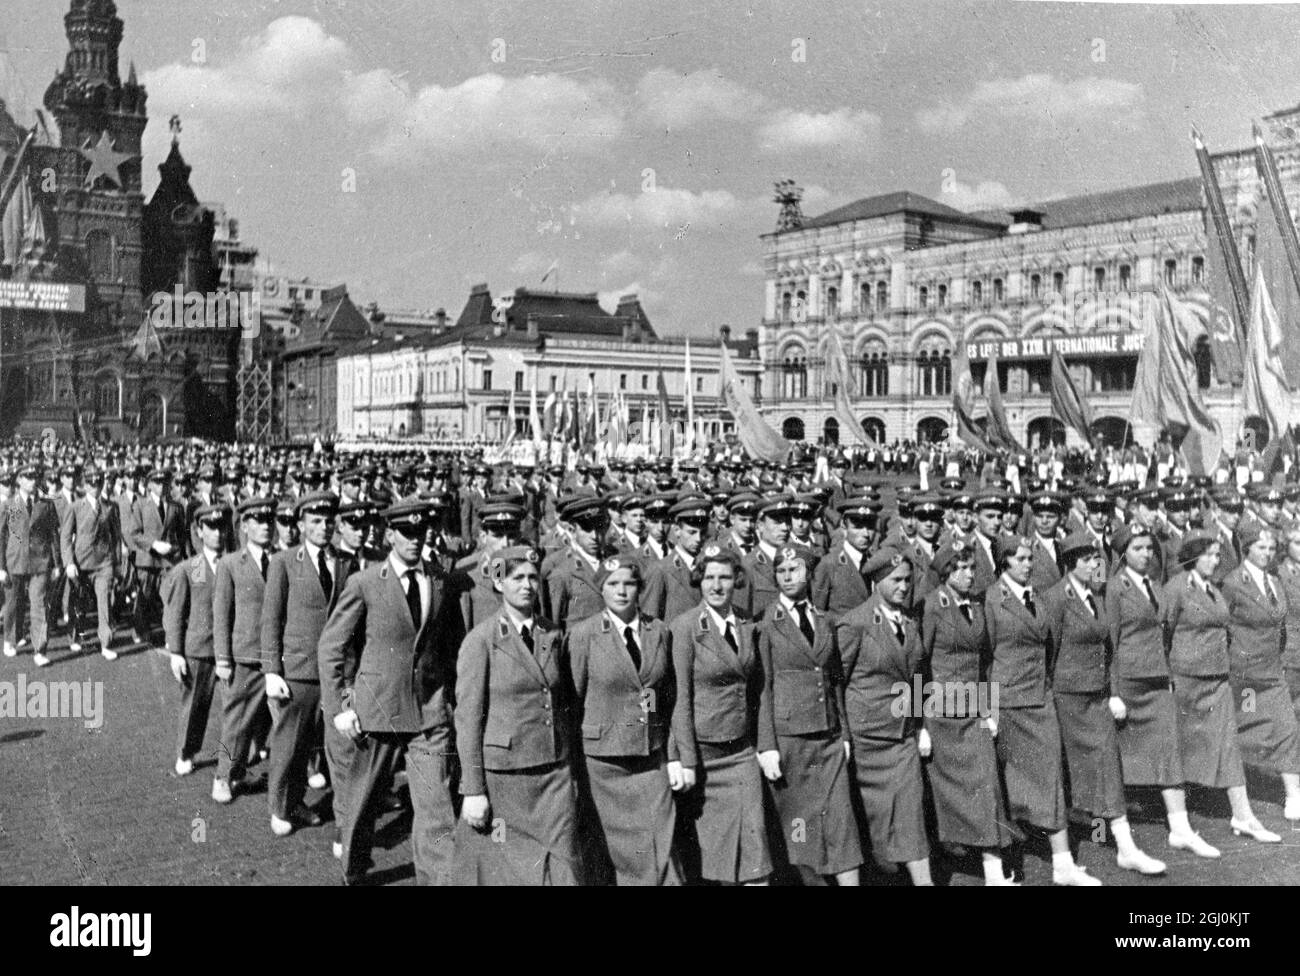 A million young athletes, drawn from all sports societies in all parts of the Soviet Union, paraded before Stalin and his chief ministers on the 23rd International Youth Day in Moscow Children from Republican Spain also took part in the gigantic display. Young pupils of a Flying School.. 19 September 1937 Stock Photo